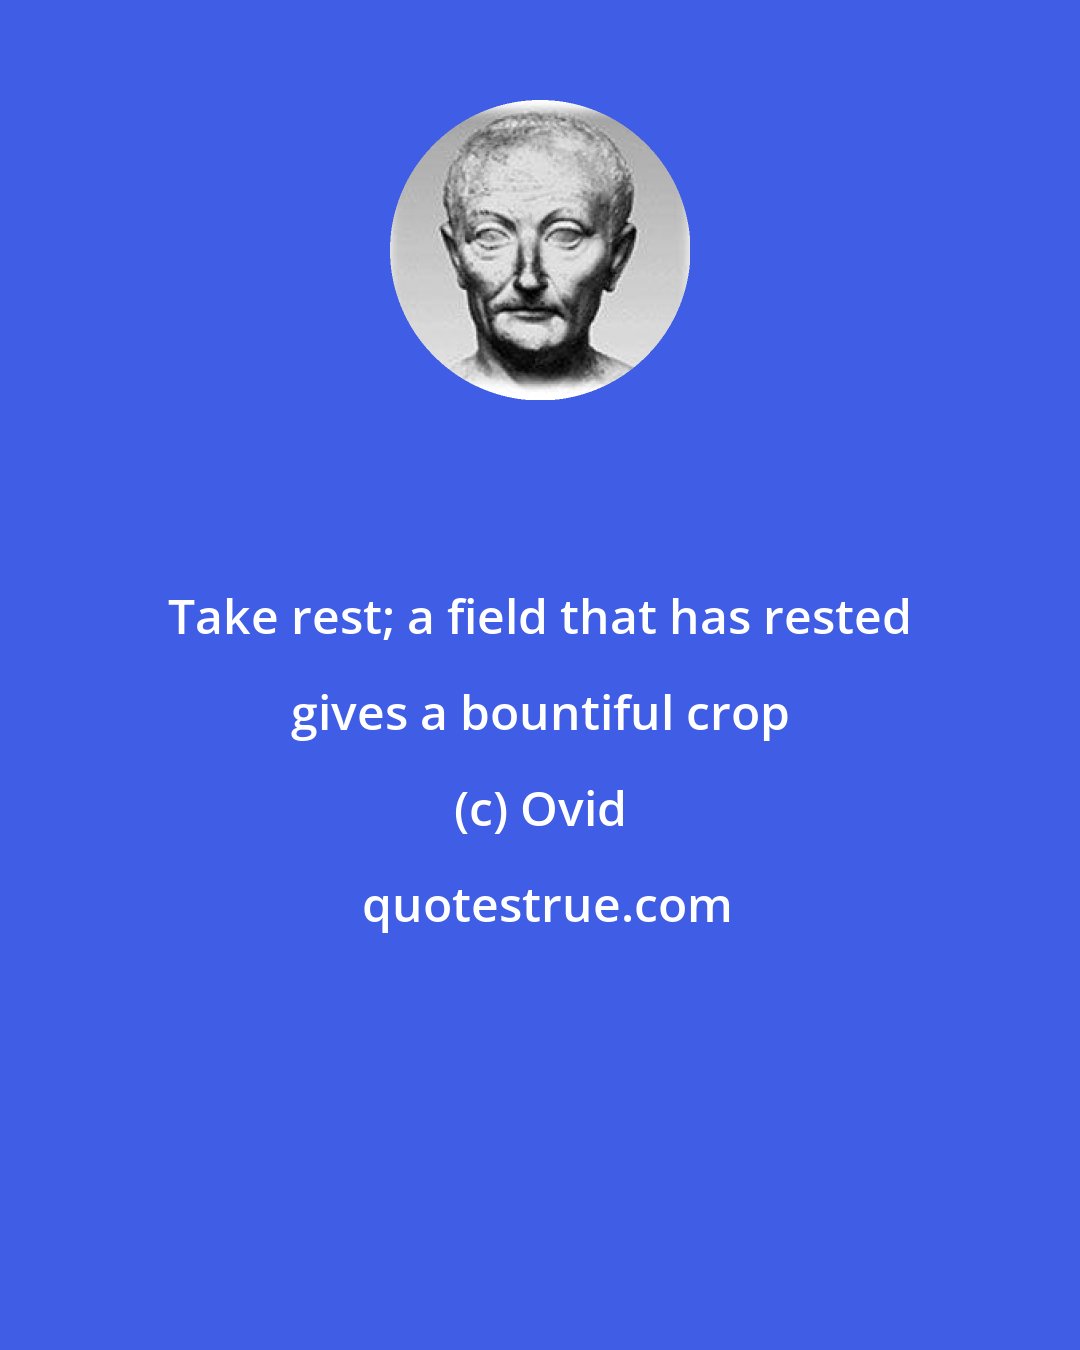 Ovid: Take rest; a field that has rested gives a bountiful crop